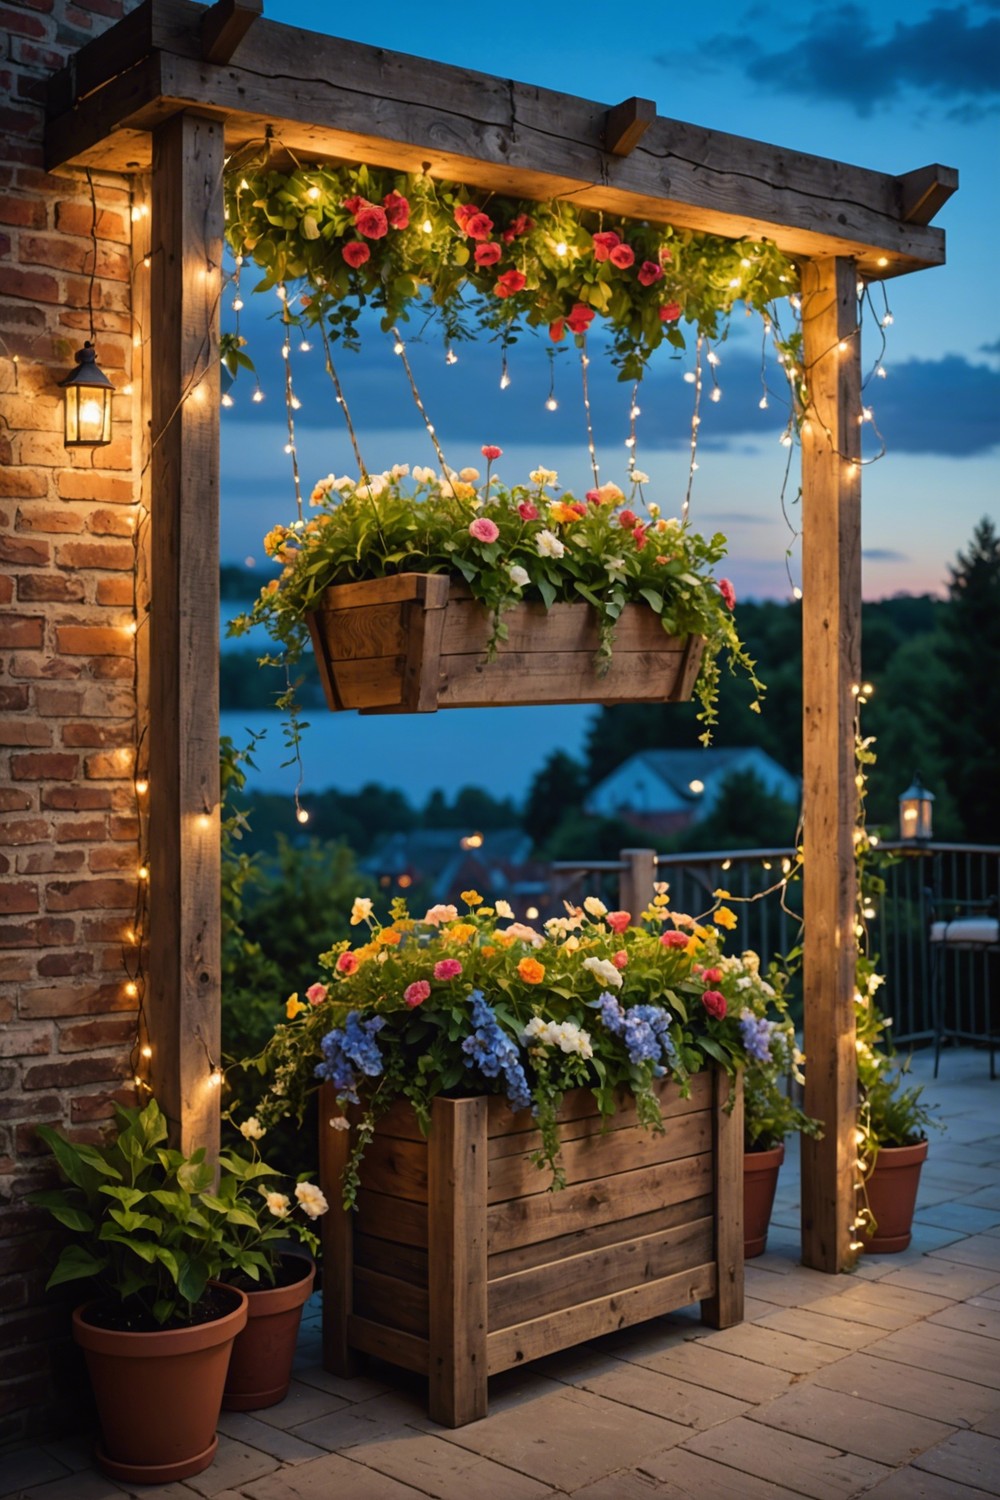 Hanging Wooden Planters with Fairy Lights and Flowers